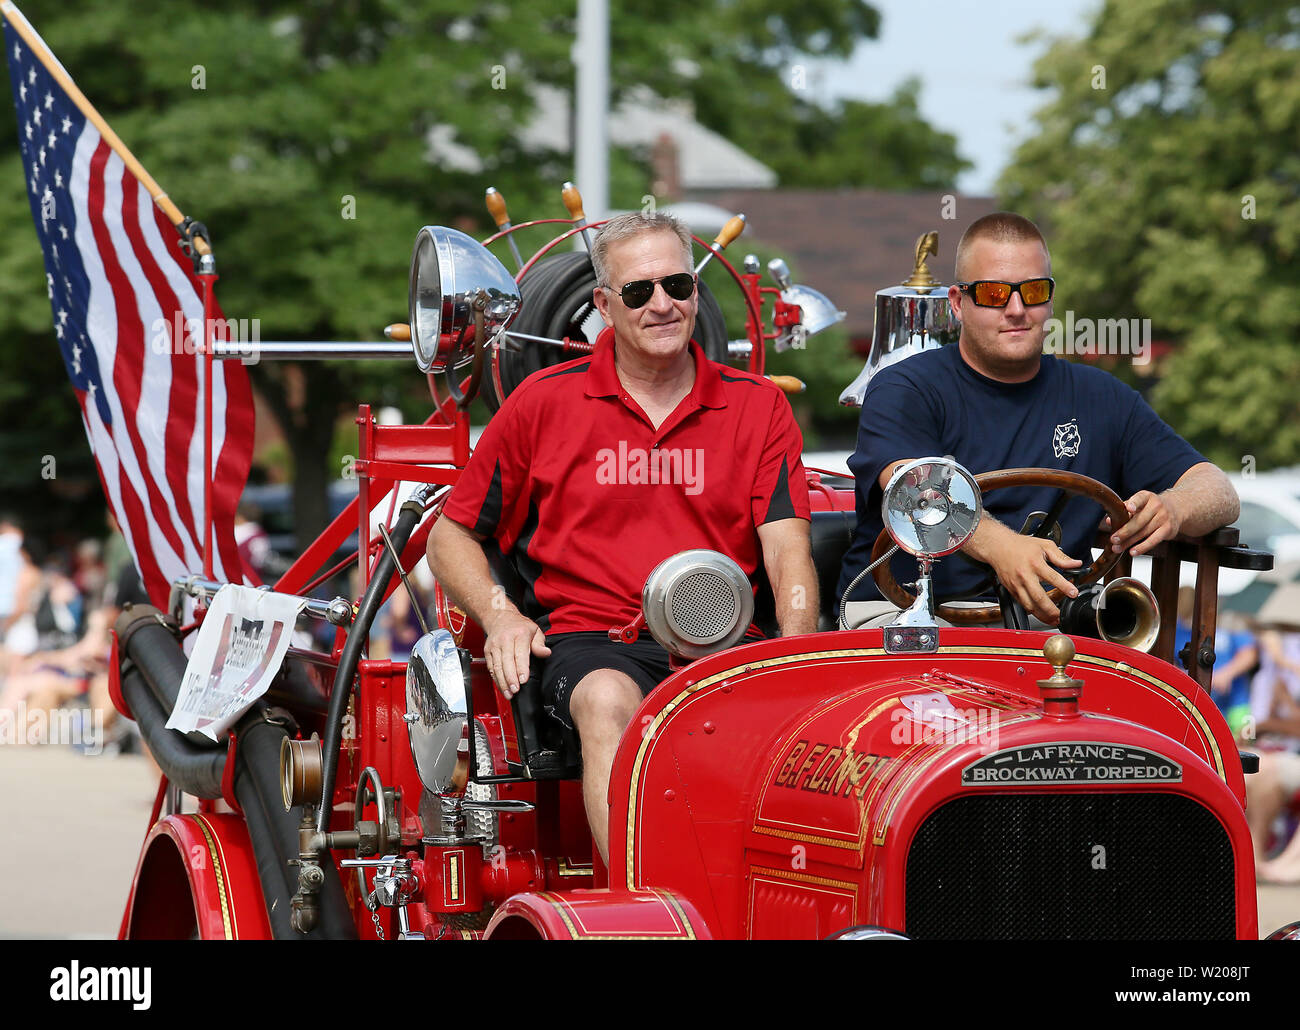 Bettendorf, Iowa, USA. 4th July, 2019. Austin, right and Rod Blunk with the Bettendorf Fire Department drive the departments first fire truck along State Street during the Fourth of July parade in Bettendorf, Iowa Thursday, July 04, 2019. The American LaFrance Brockway Torpedo, a 1922 model, came from Elmira, N.Y. It was purchased by the city of Bettendorf in 1924 for $6,000 and delivered by train in early November of that year. Credit: Kevin E. Schmidt/Quad-City Times/ZUMA Wire/Alamy Live News Stock Photo